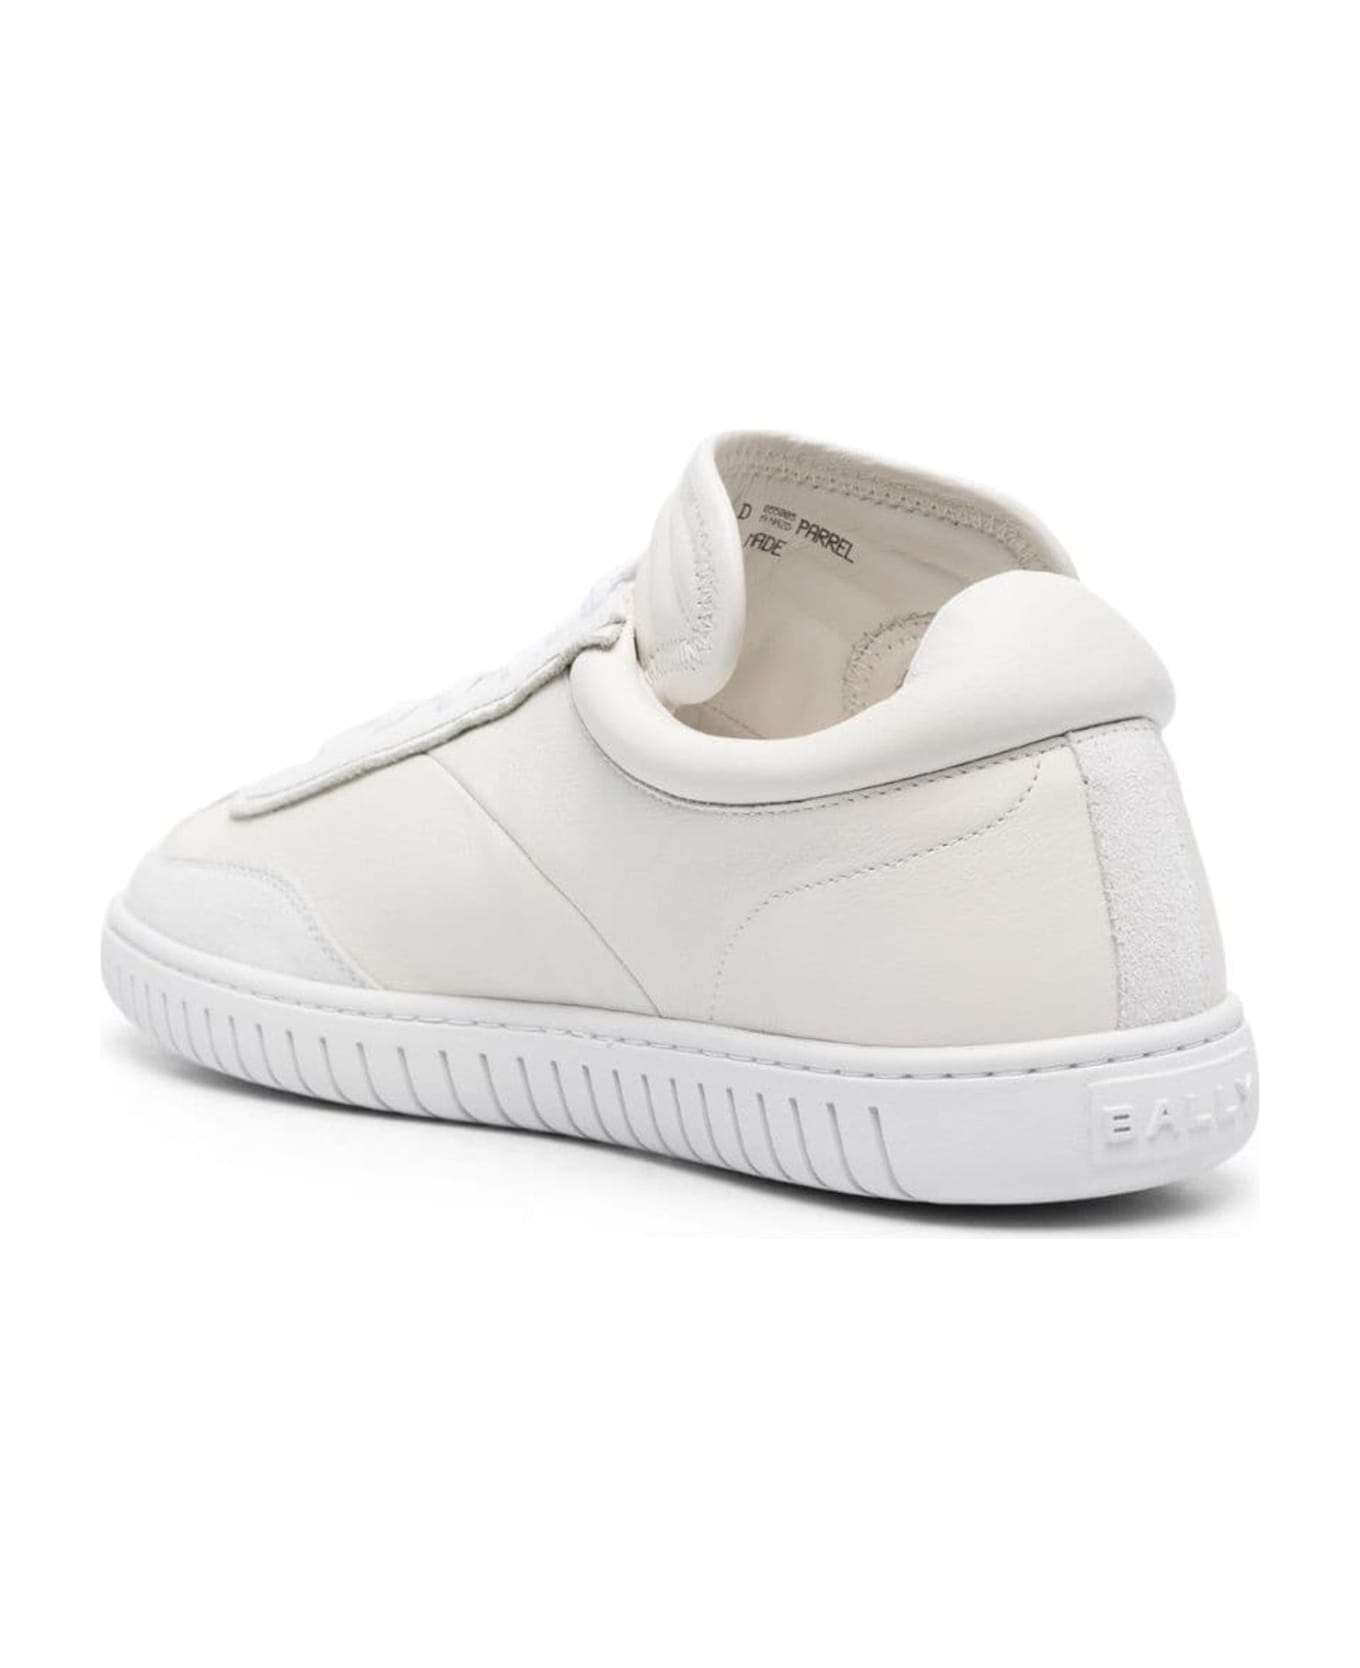 Bally Leather Sneakers - White